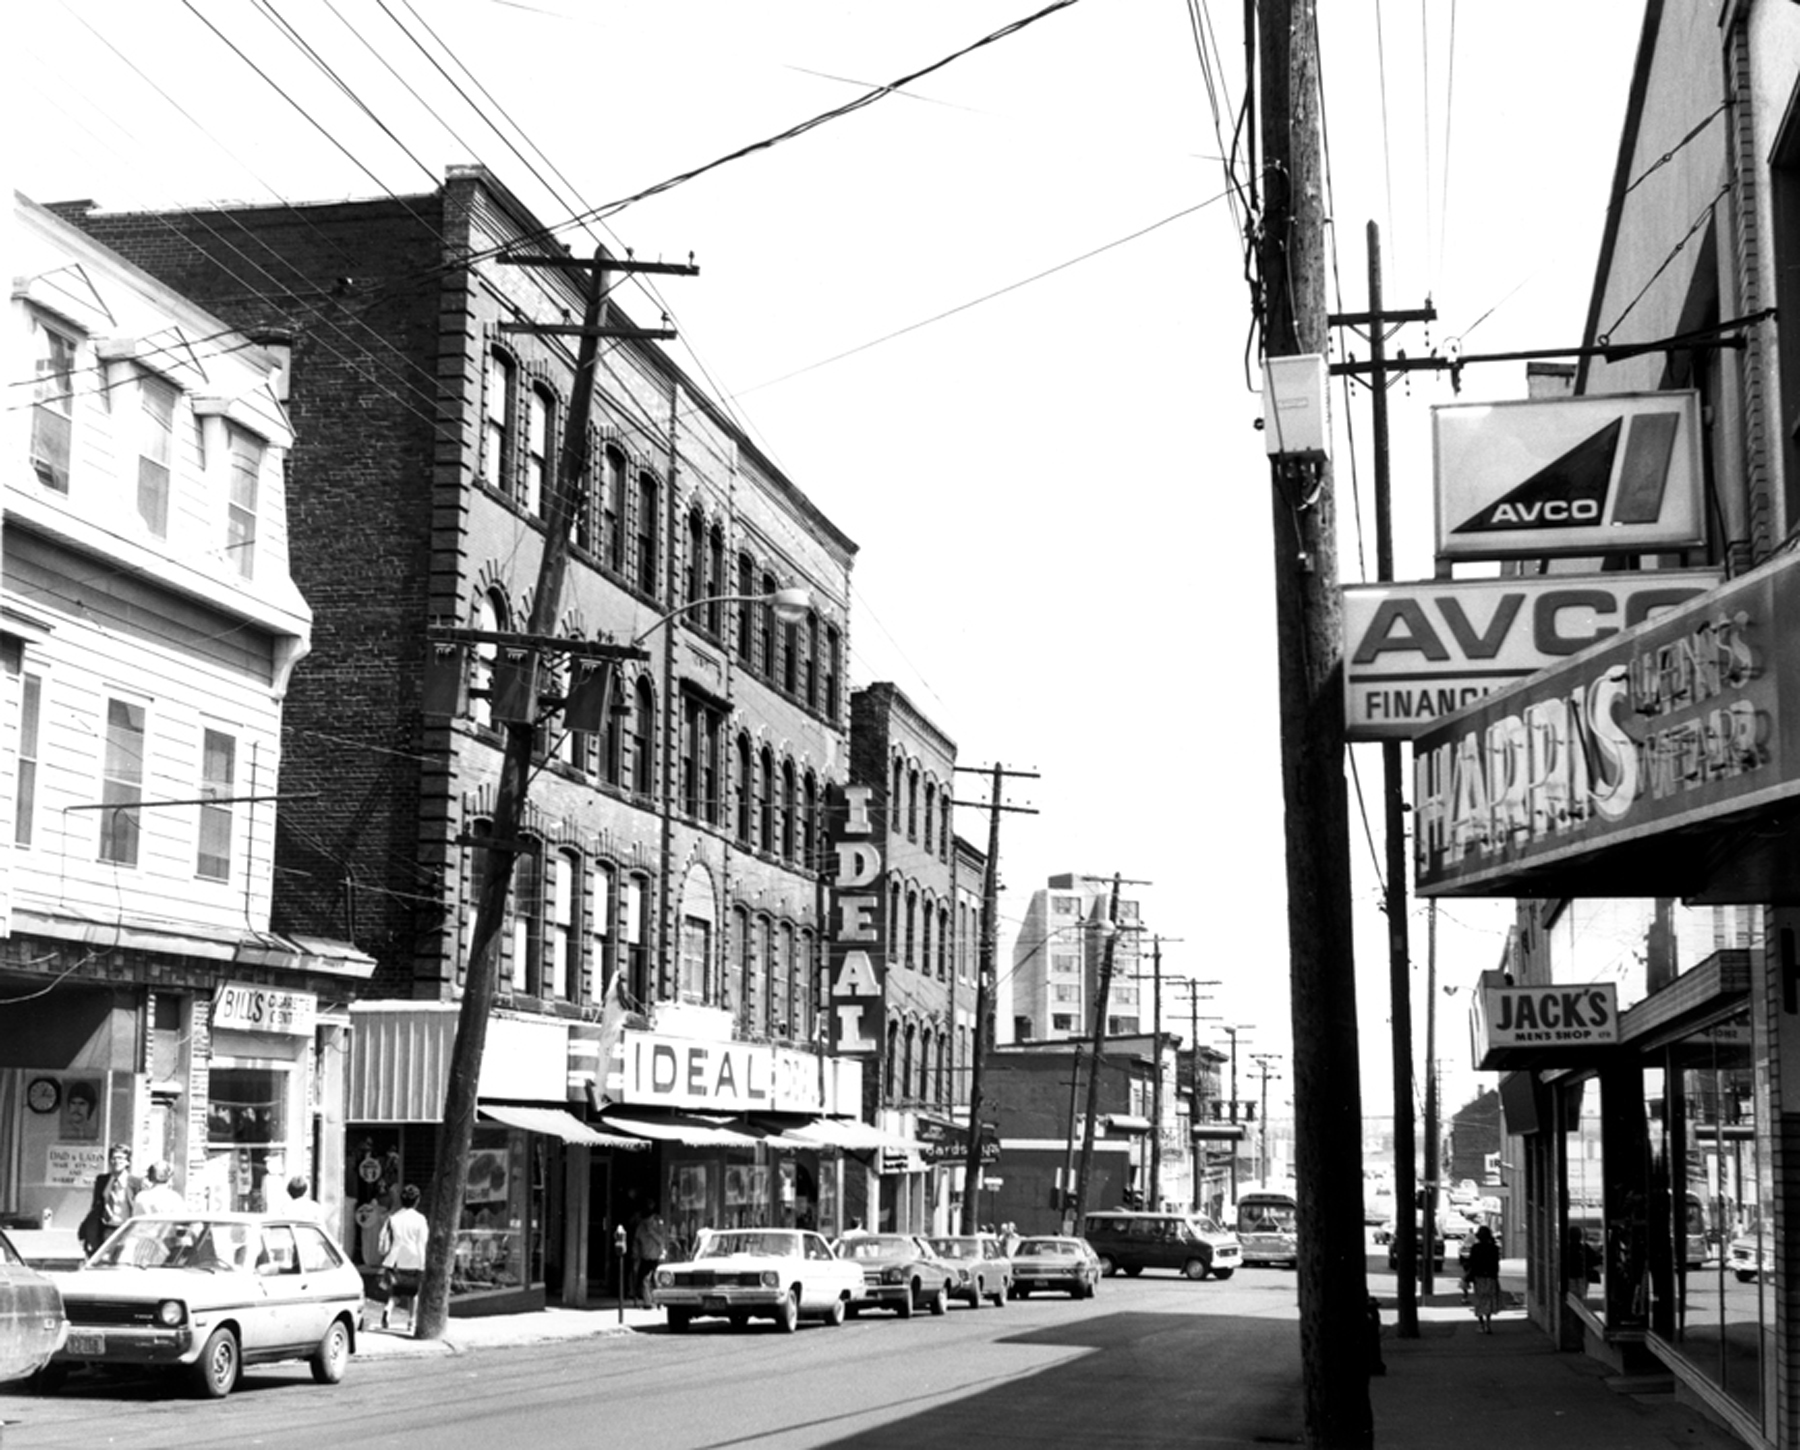 View of street lined with two and three storey buildings with stores at street level and signage including Bill’s Cigarette Centre, Ideal, Jack’s Men’s Shop and Harry’s Men’s Wear.